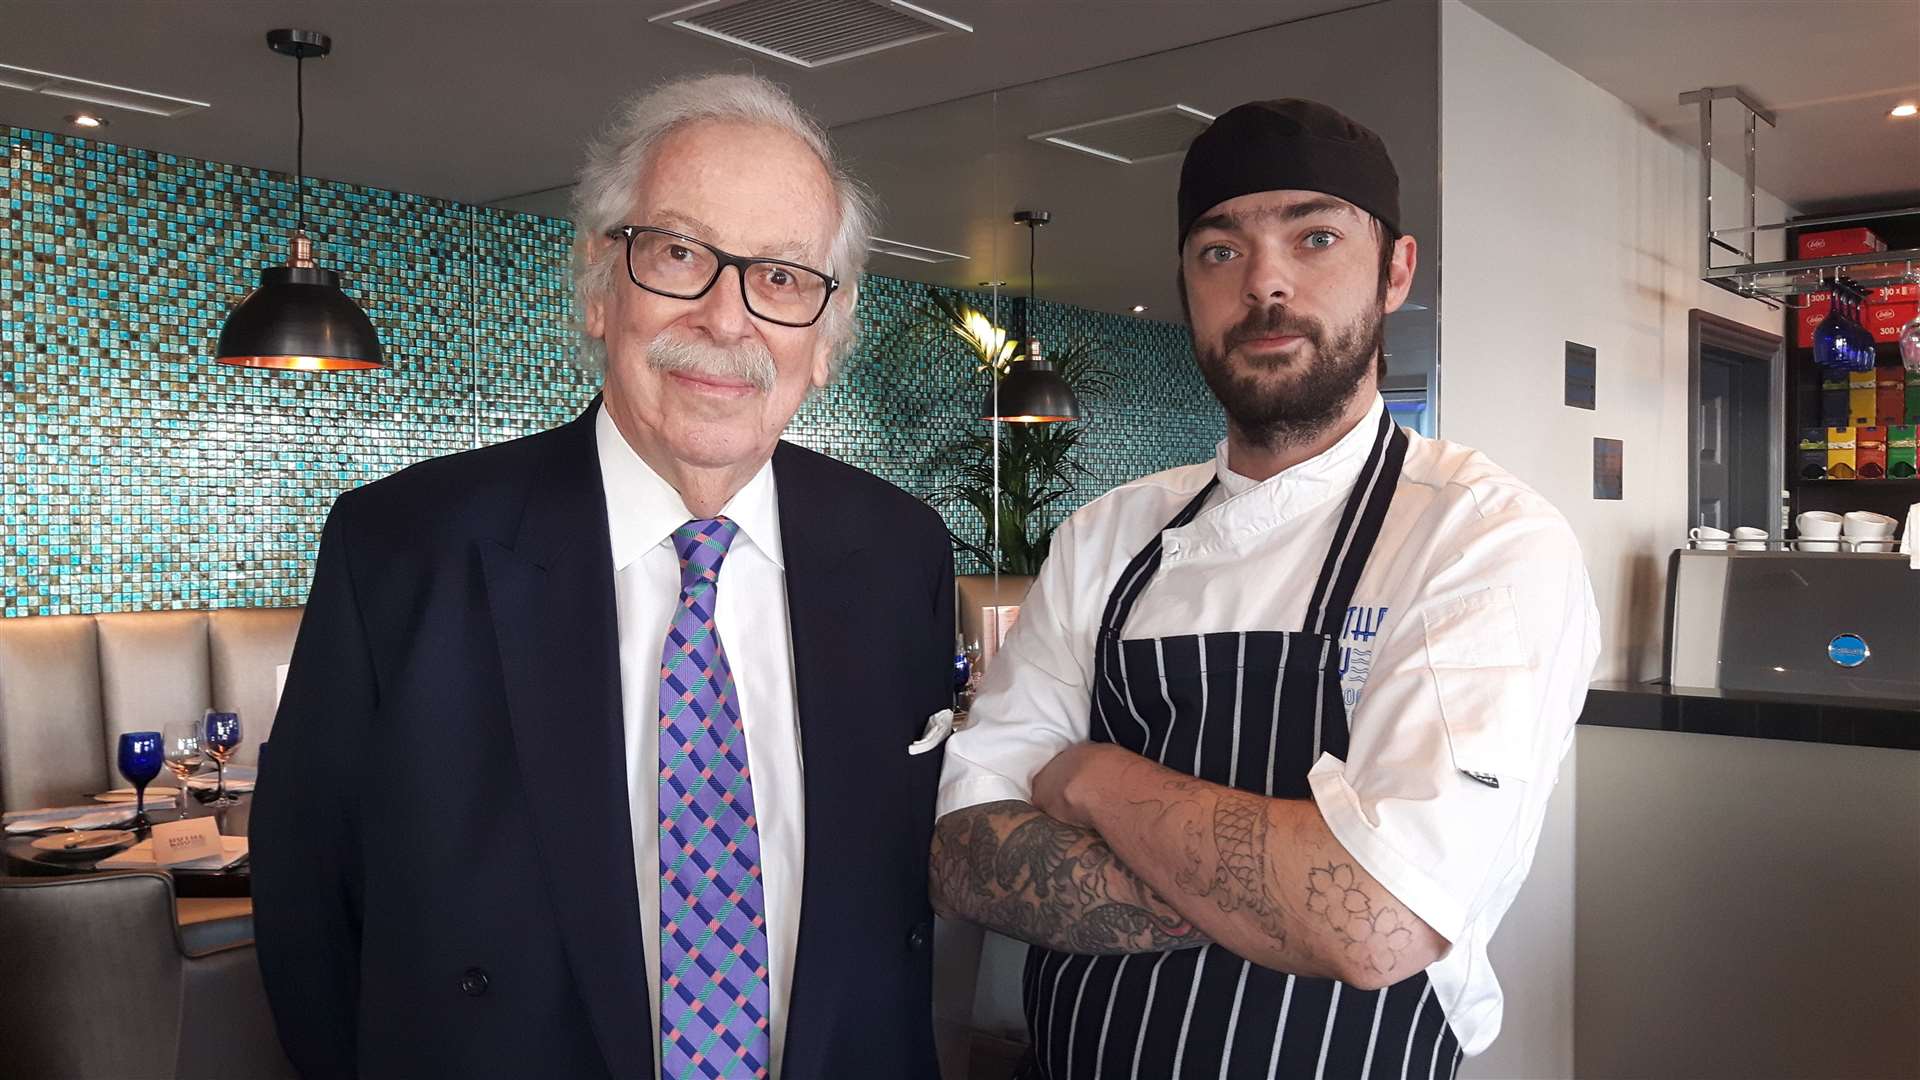 Turrloo Parrett, pictured with chef Jamie Colvin, when he opened Hythe Bay Seafood Restaurant and Bar in Deal in 2016